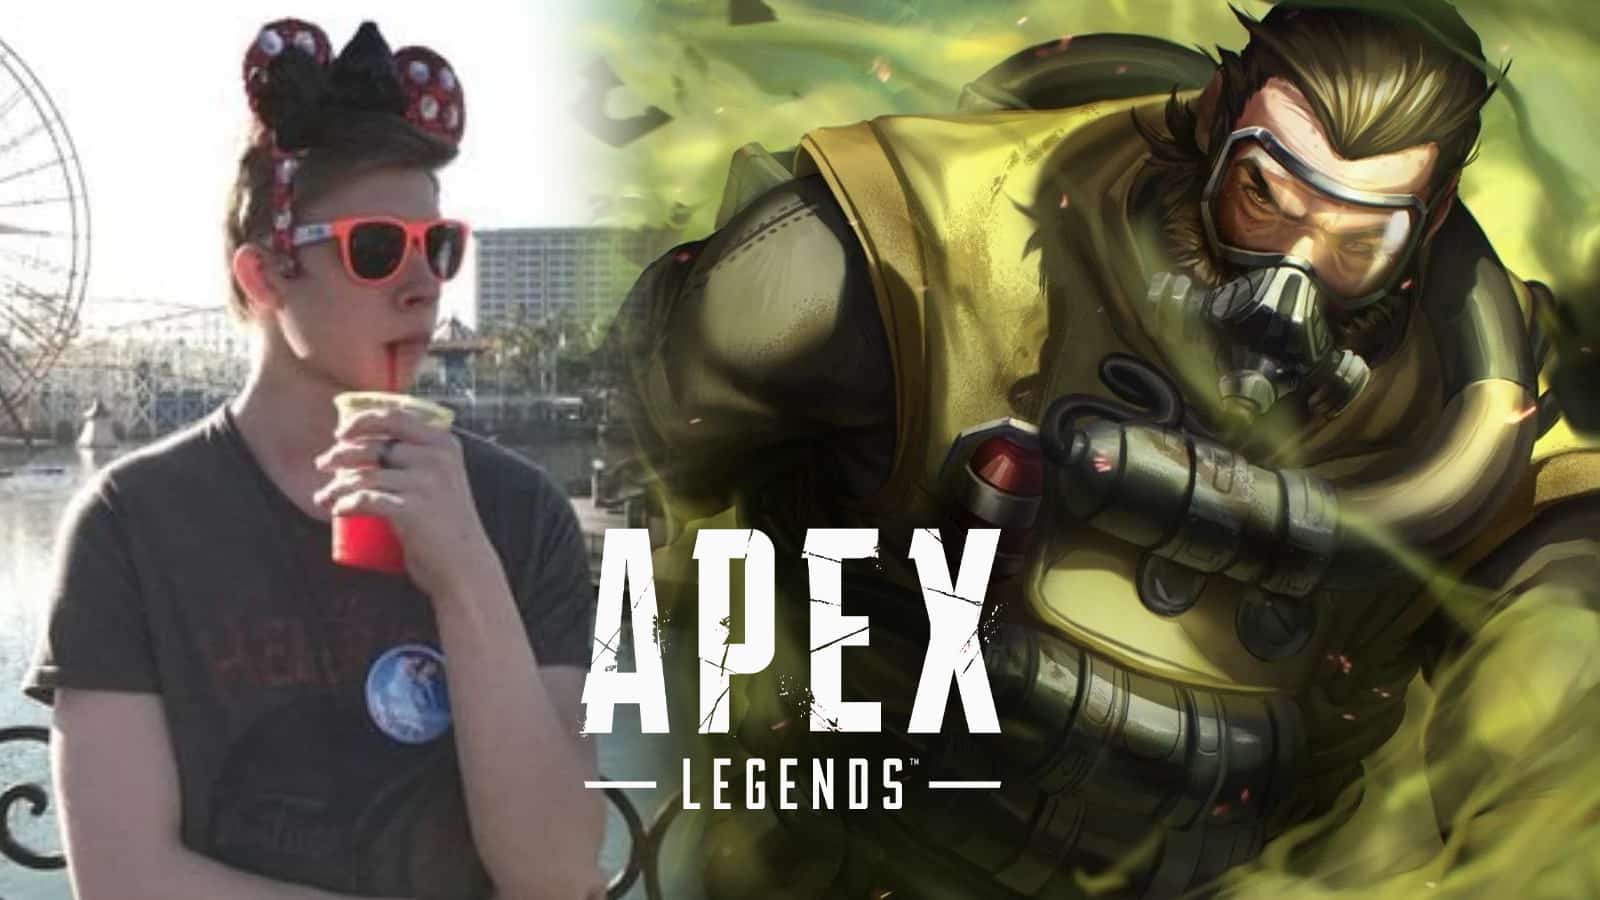 Apex Legends streamer Taxi2g looking at Caustic